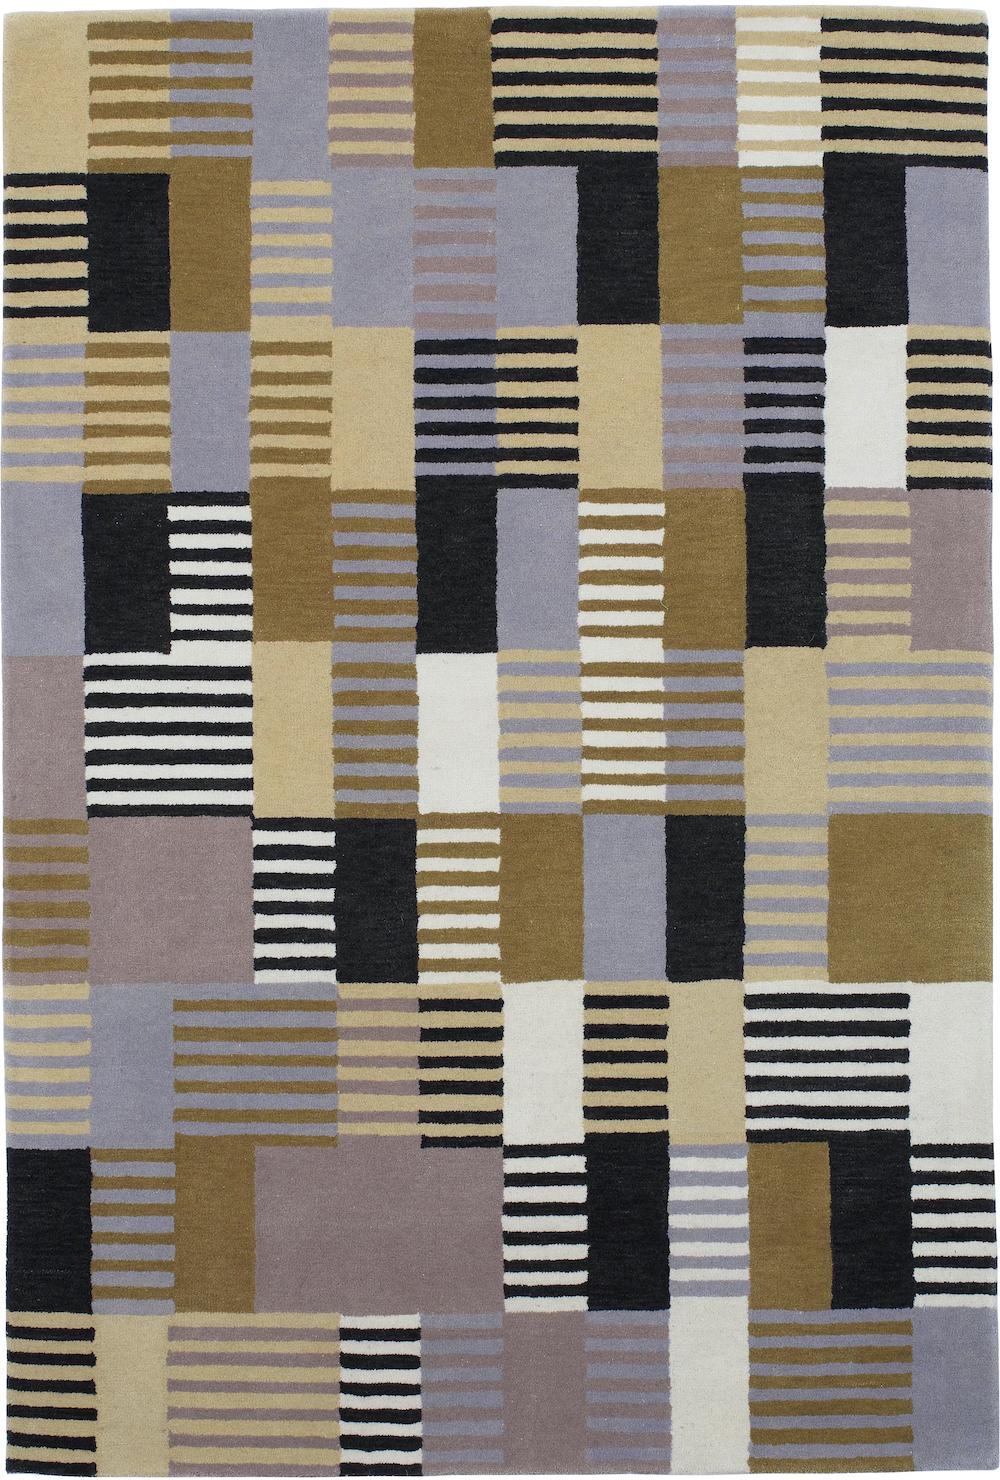 anni albers wall hanging